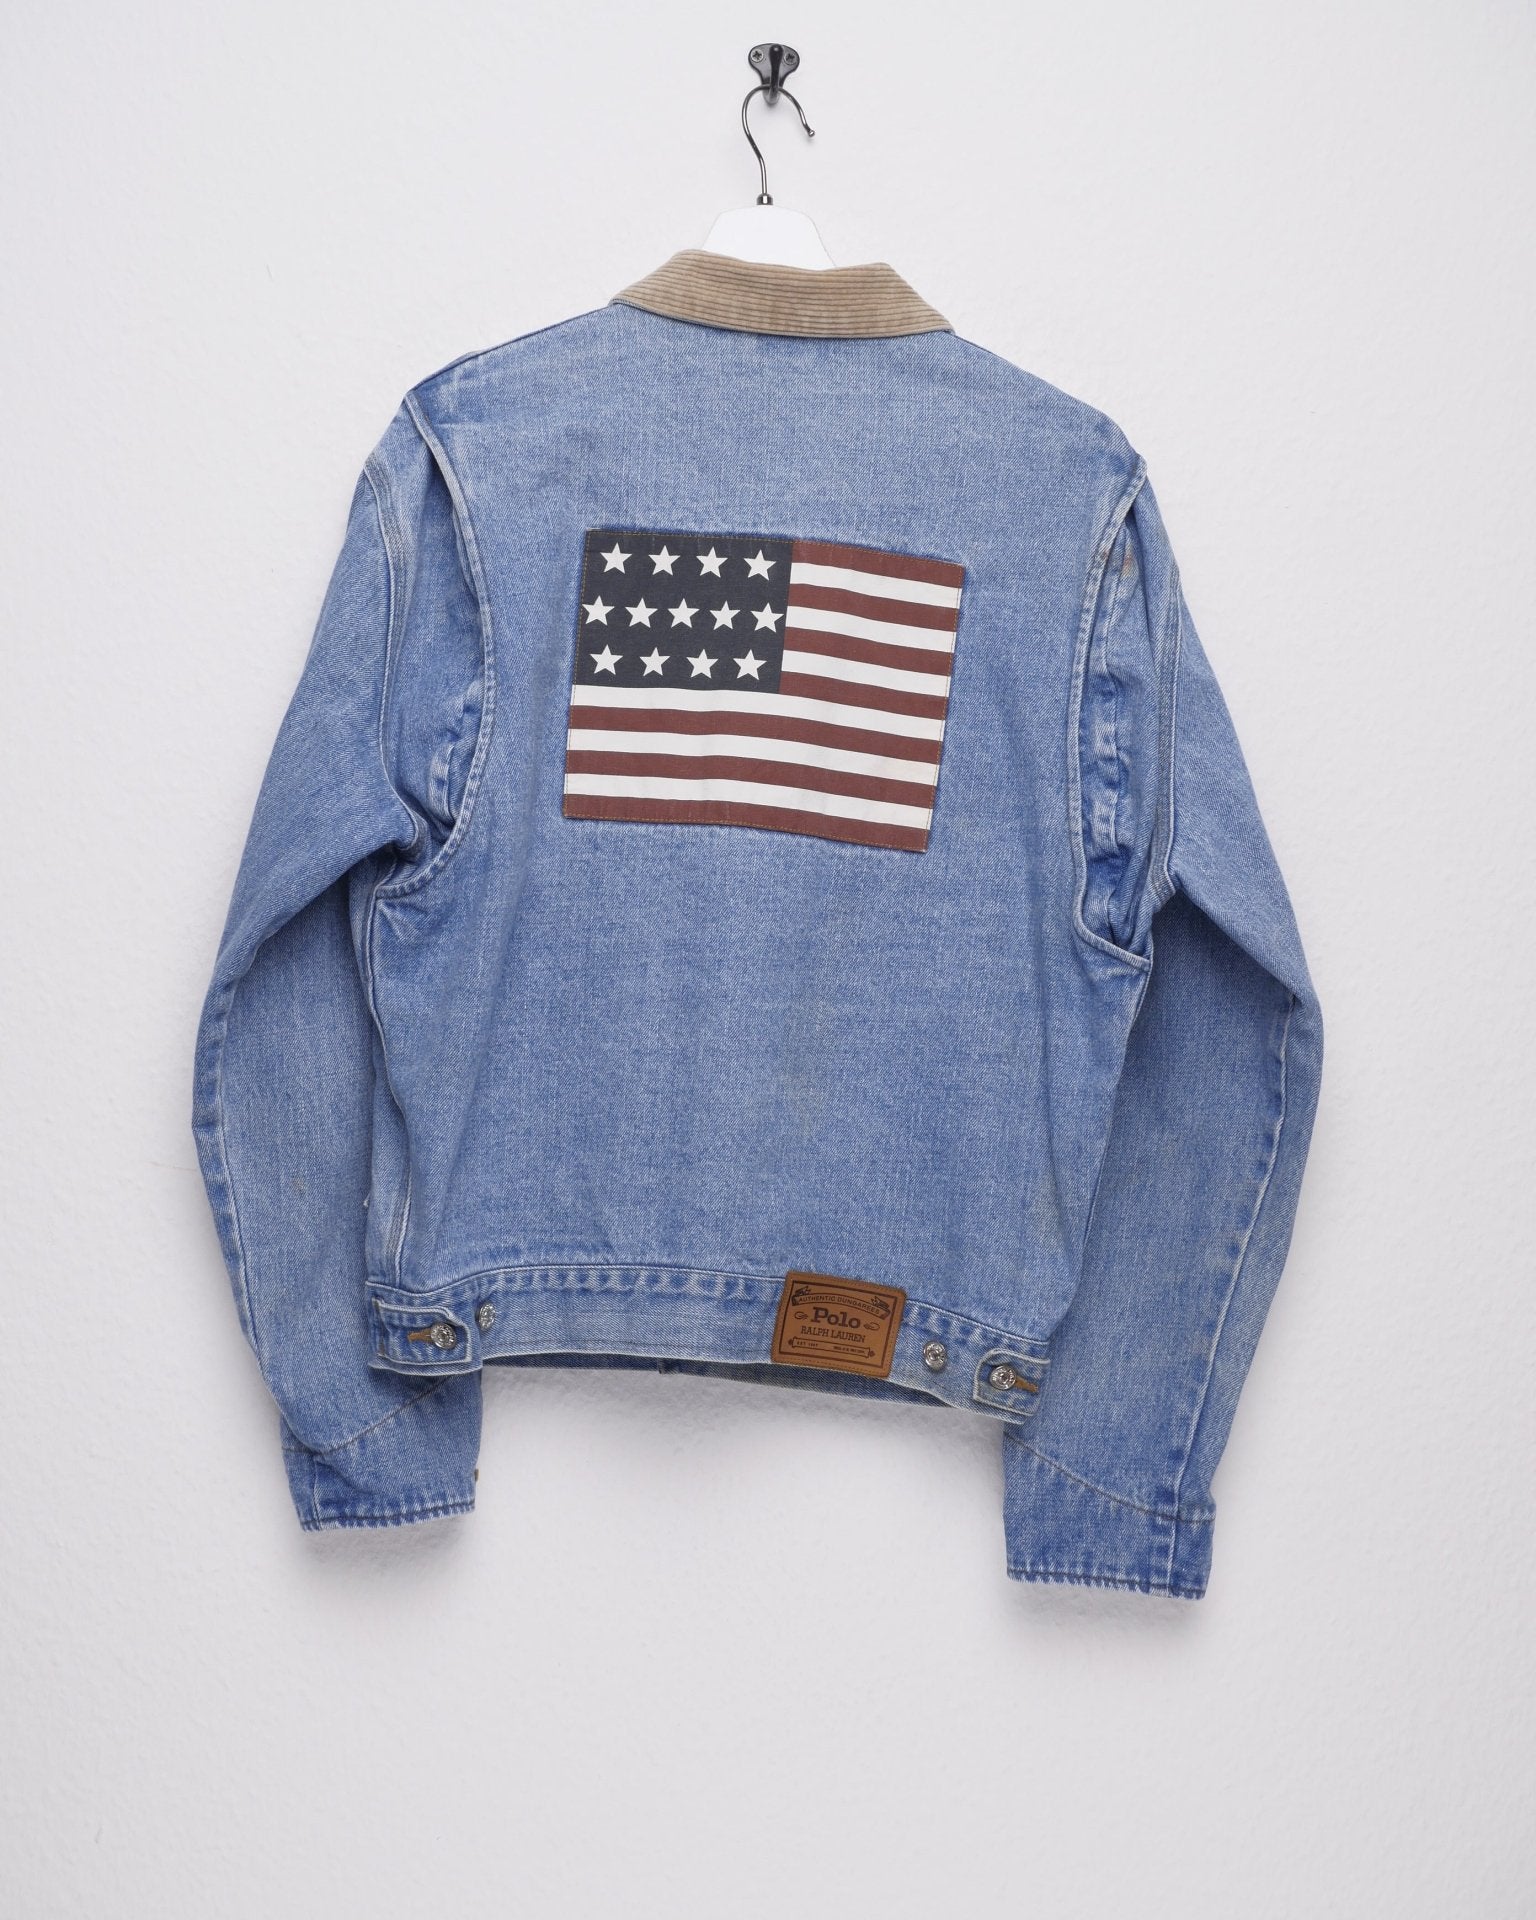 Polo Ralph Lauren America Flag patched light washed Denim Jacke - Peeces